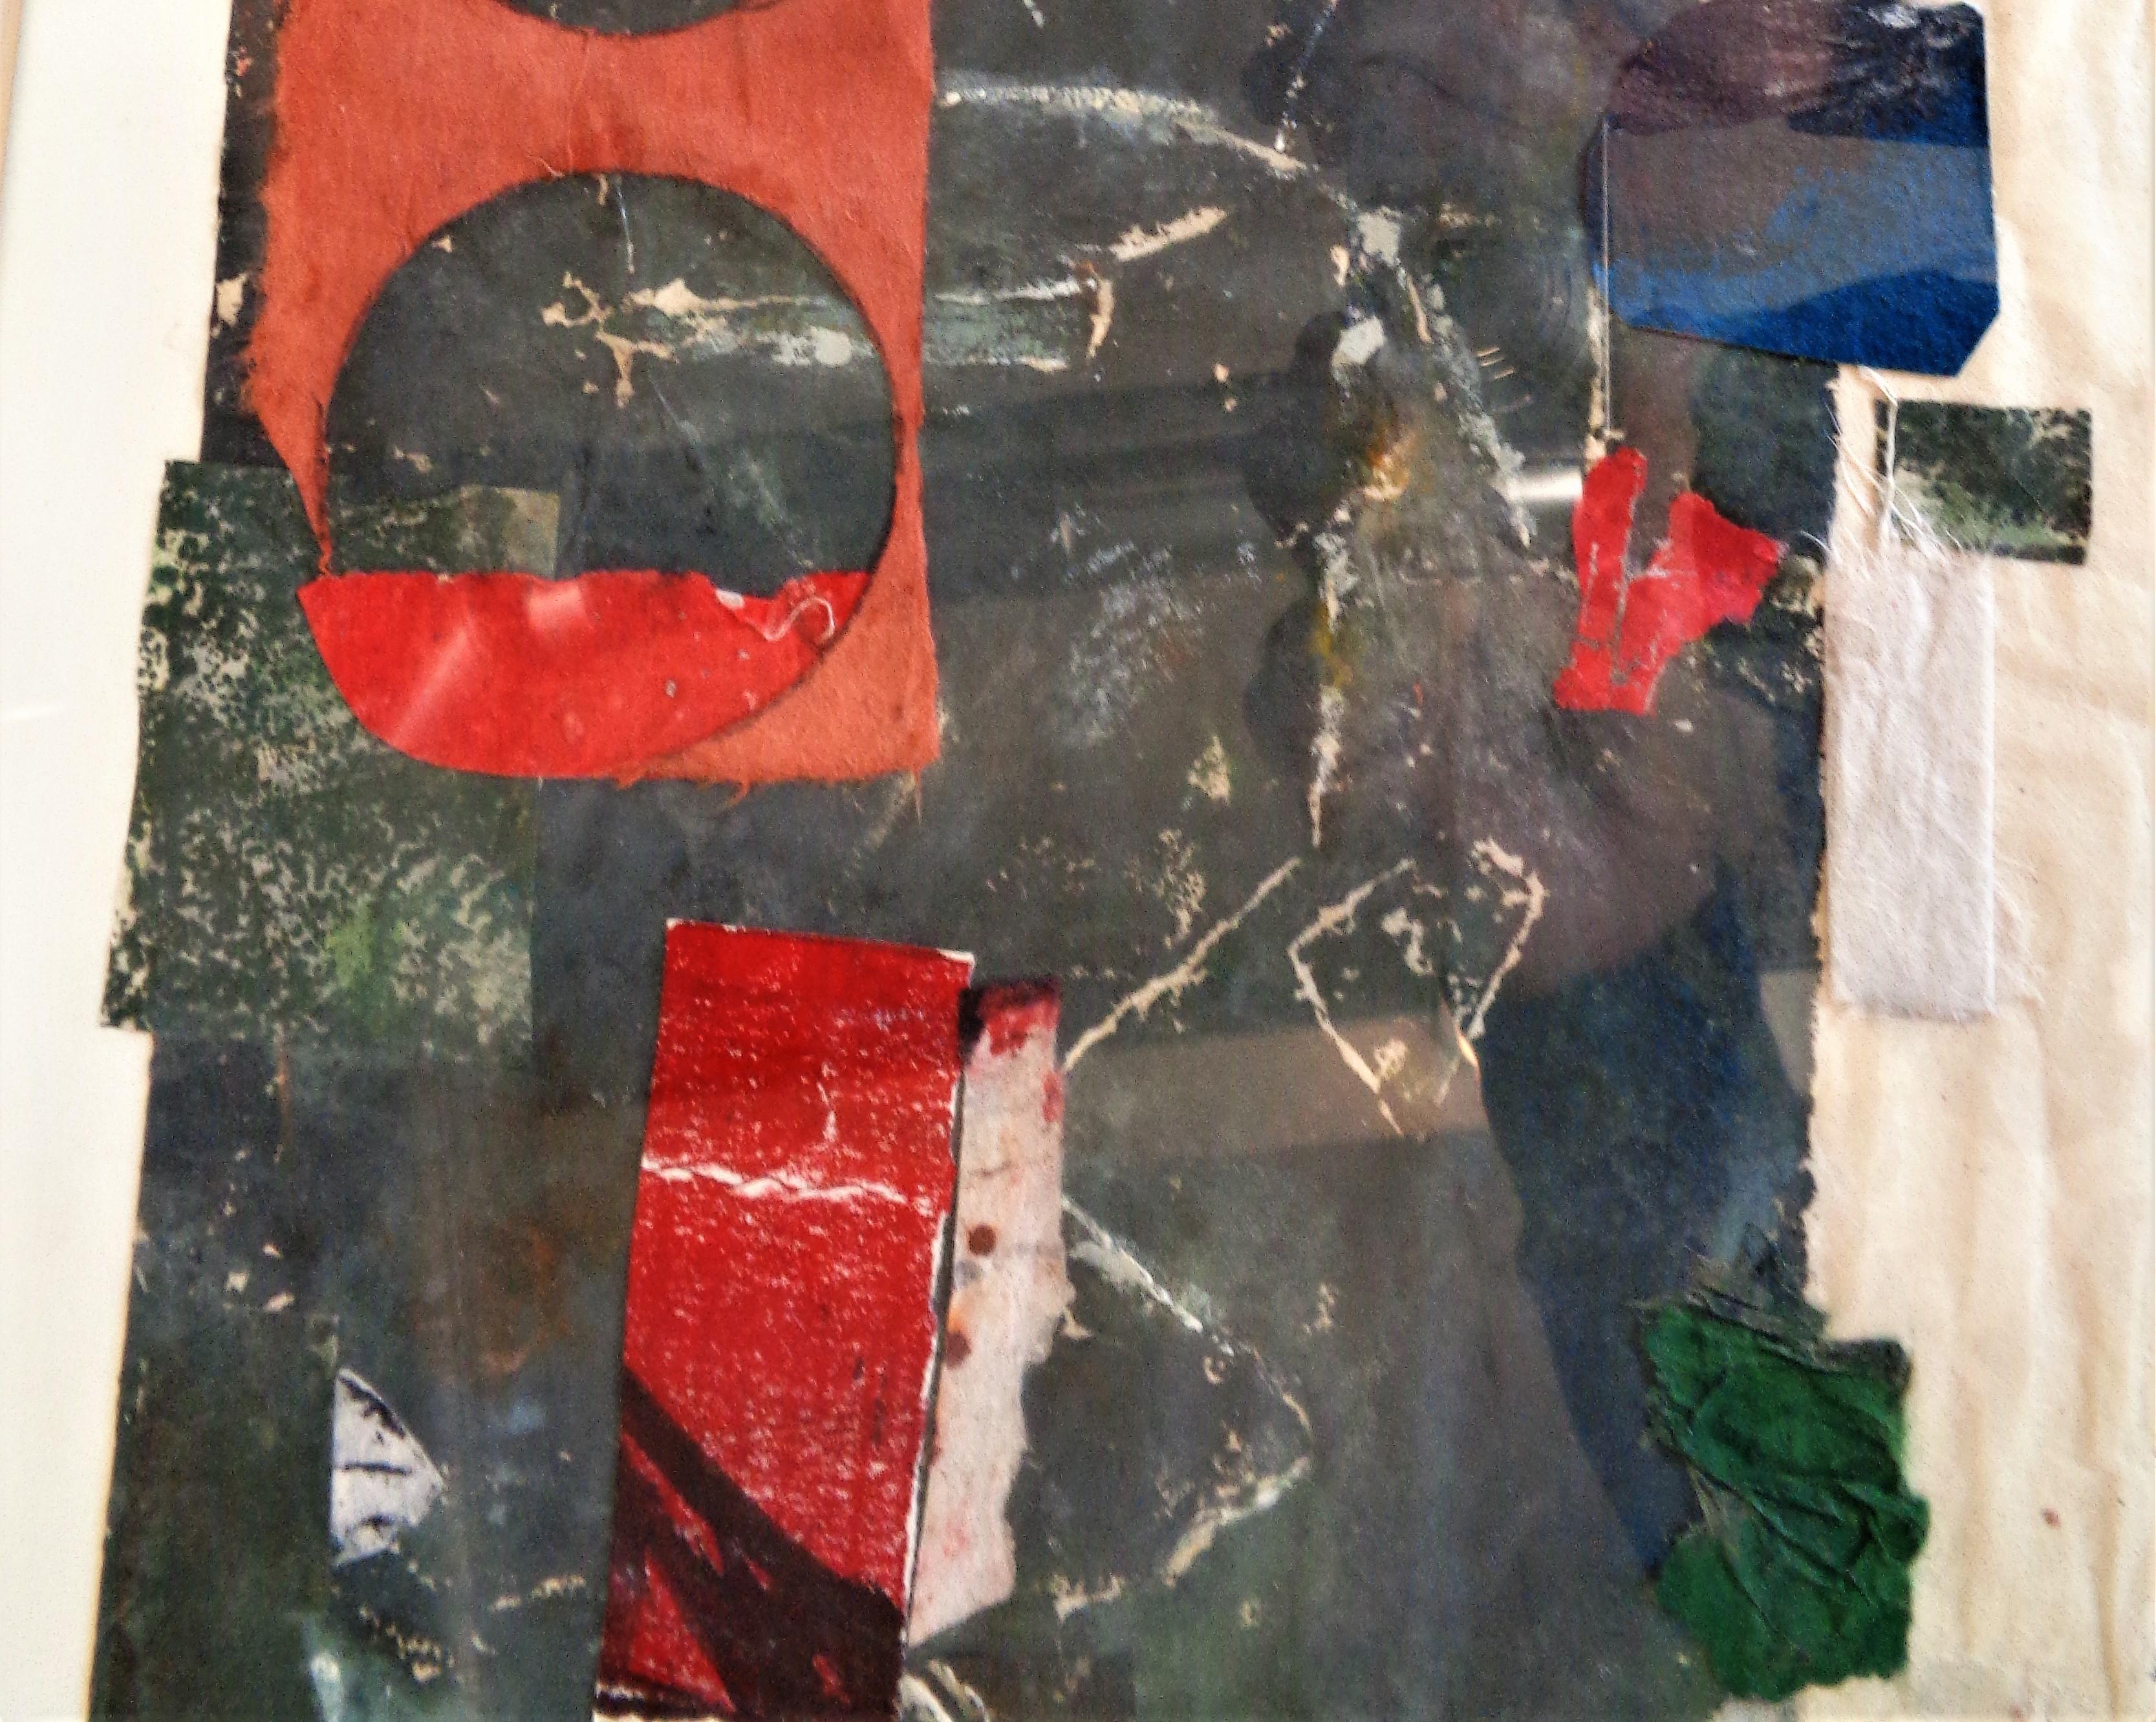 Mid-Century Modern Abstract Mixed Media Collage Painting by Hilda Altschule, 1971